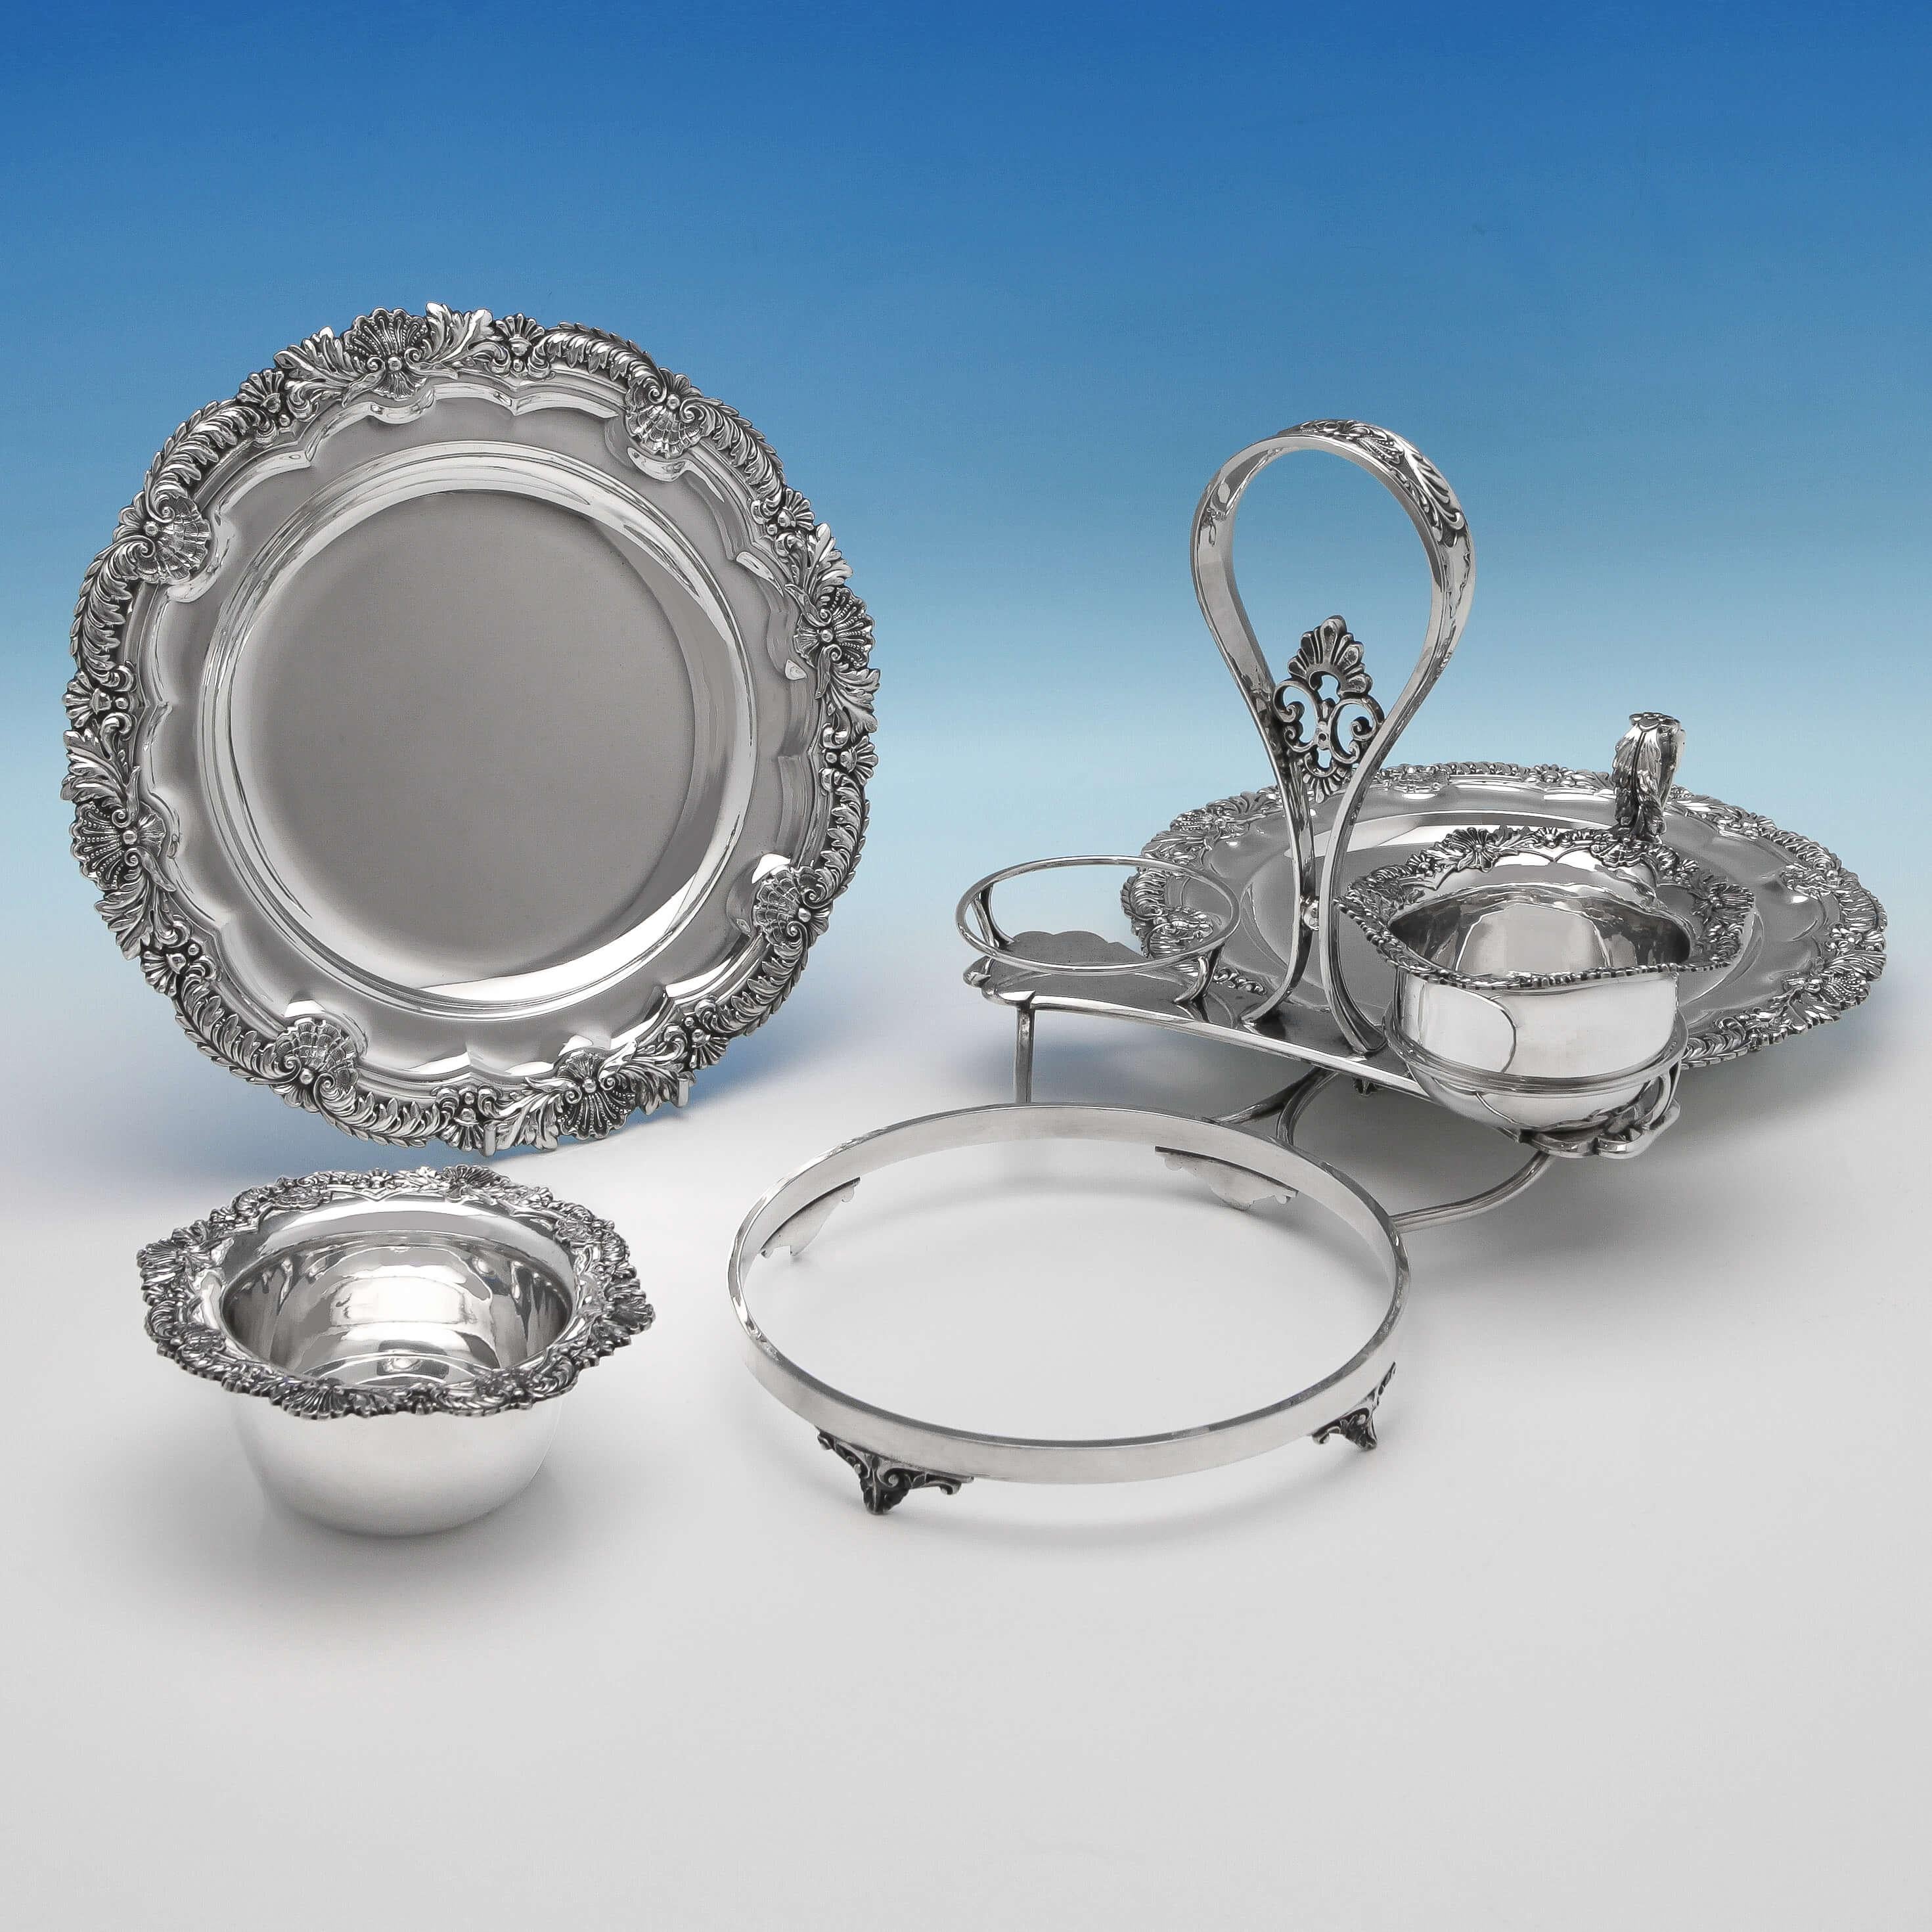 Hallmarked in Sheffield in 1907 by James Dixon & Sons, this rare, Edwardian, antique, sterling silver strawberry dish, comprises 2 plates, a sugar bowl and cream jug. All presented in a frame, and all featuring shell and acanthus borders and